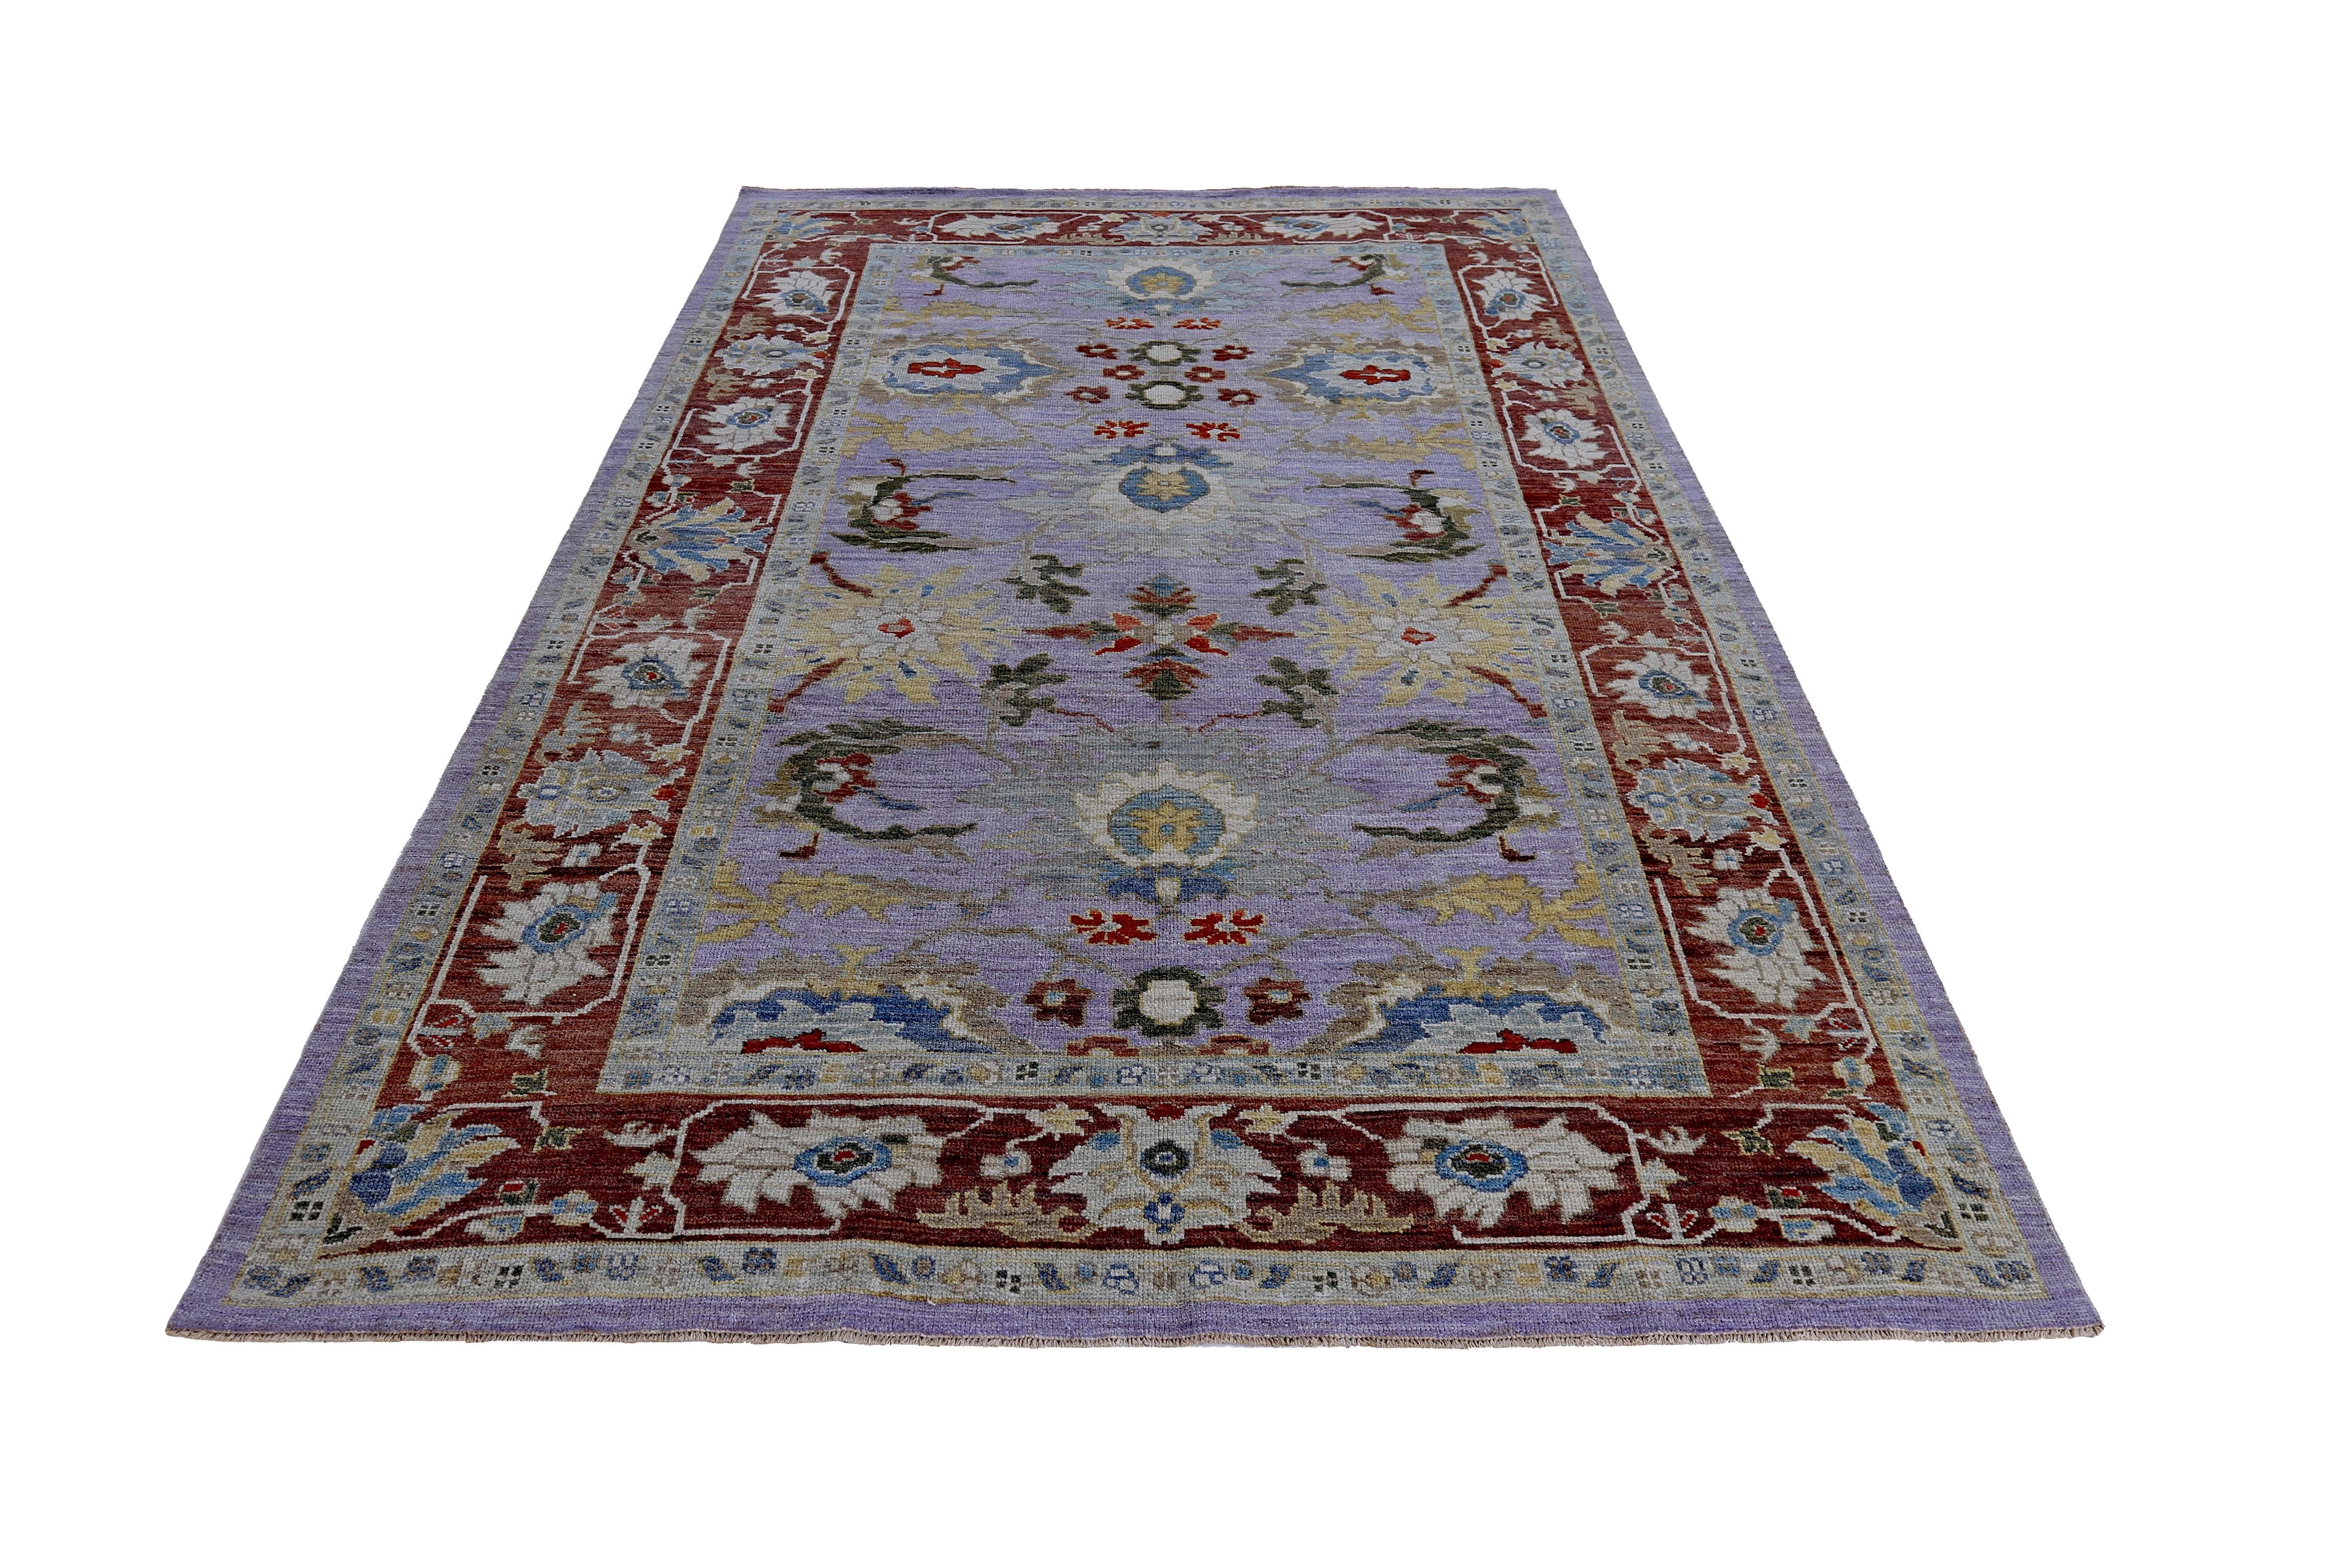 New handmade Turkish area rug from high quality sheep’s wool and colored with eco-friendly vegetable dyes that are proven safe for humans and pets alike. It’s a Classic Sultanabad design showcasing a regal purple field with prominent Herati flower